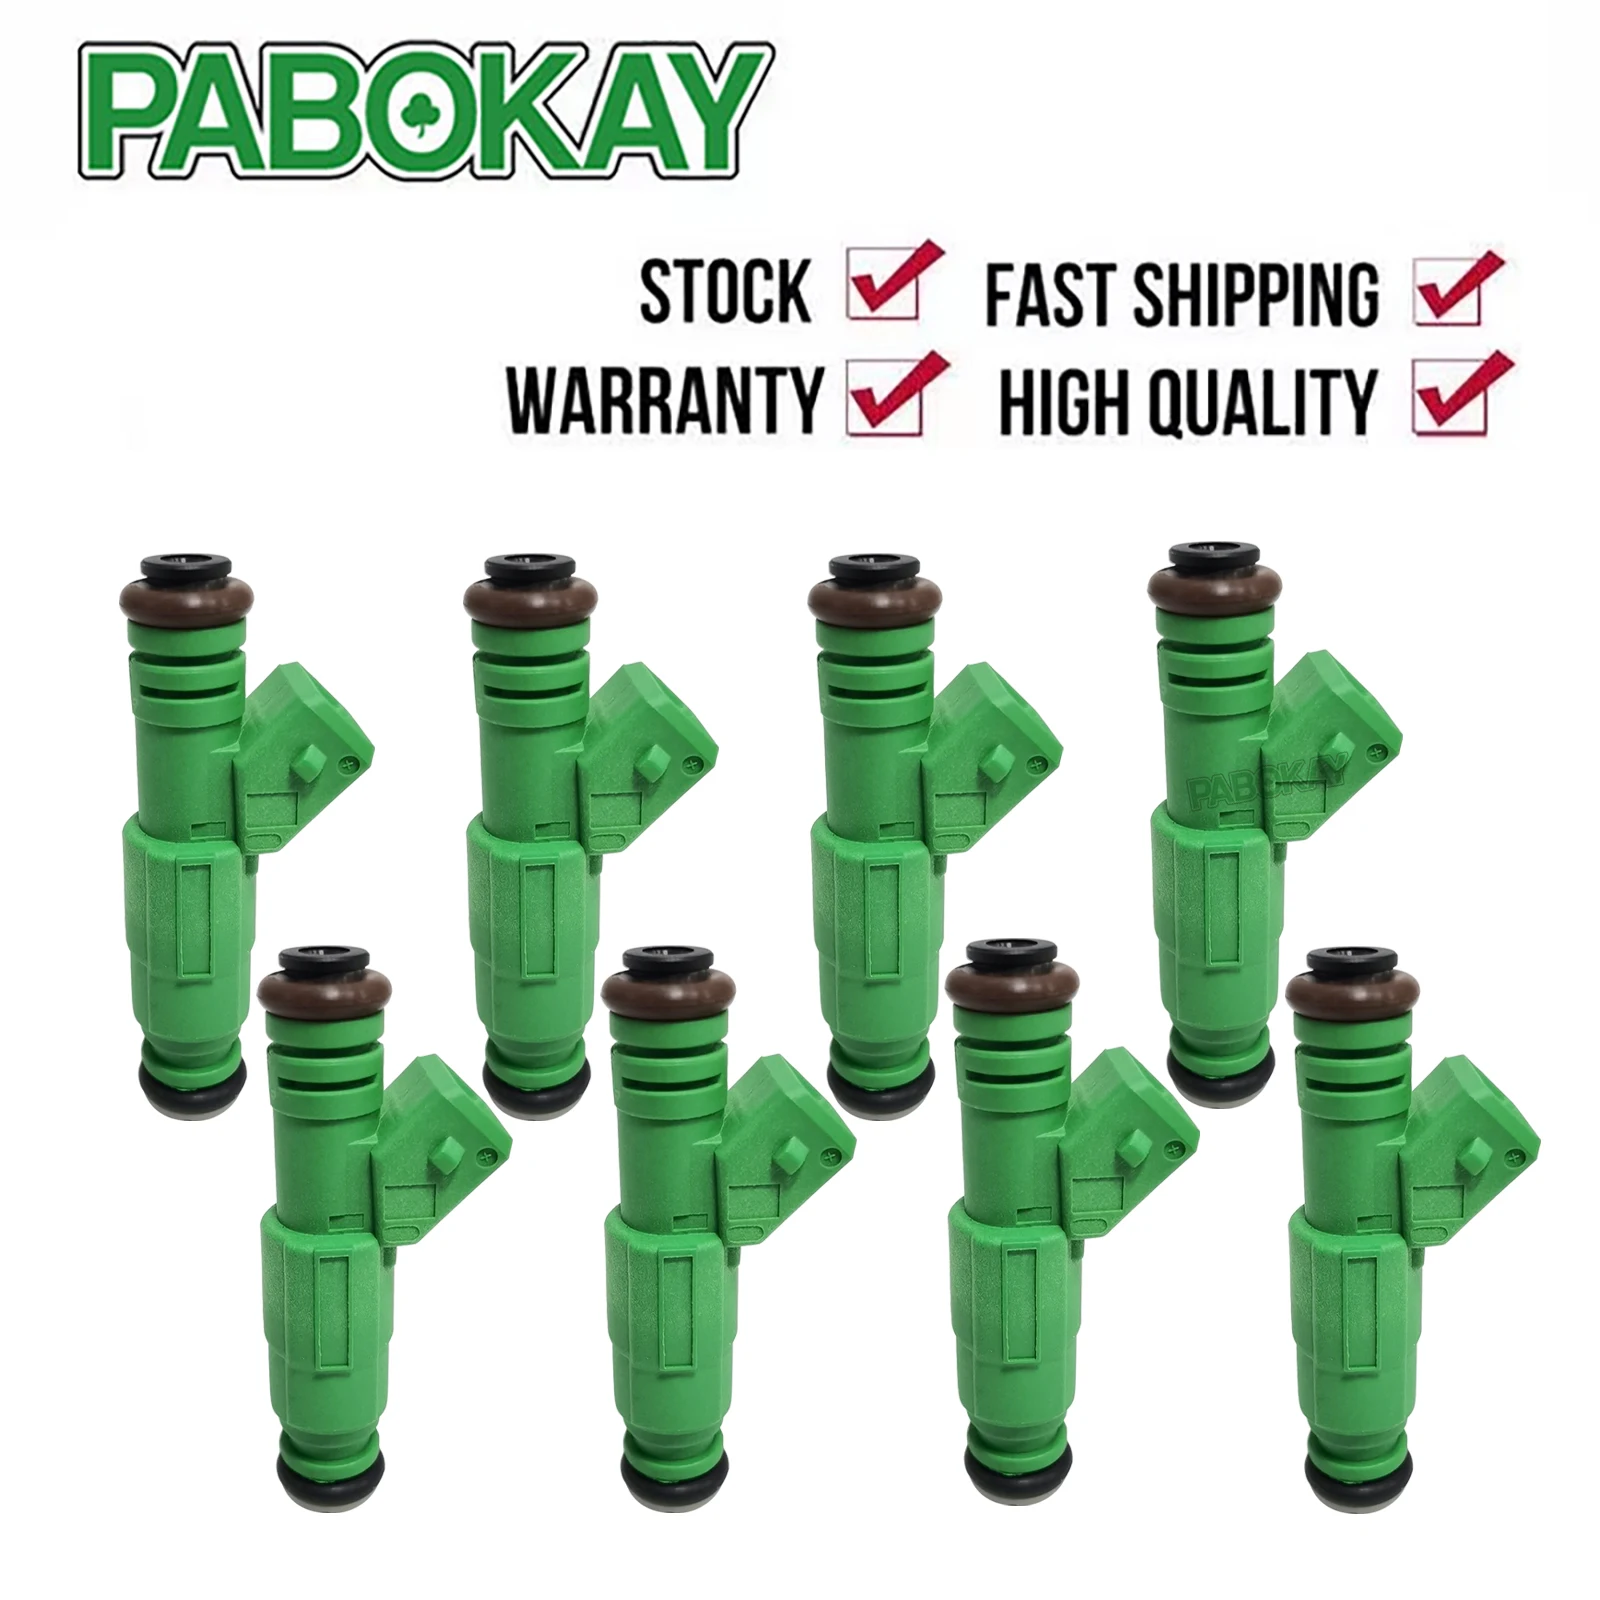 

8 pieces x FOR Audi S4 A6 Volvo Holden Ford Green Fuel Injector 0280155968 M-9593-F302 13586335 22853741 20923680 25920615